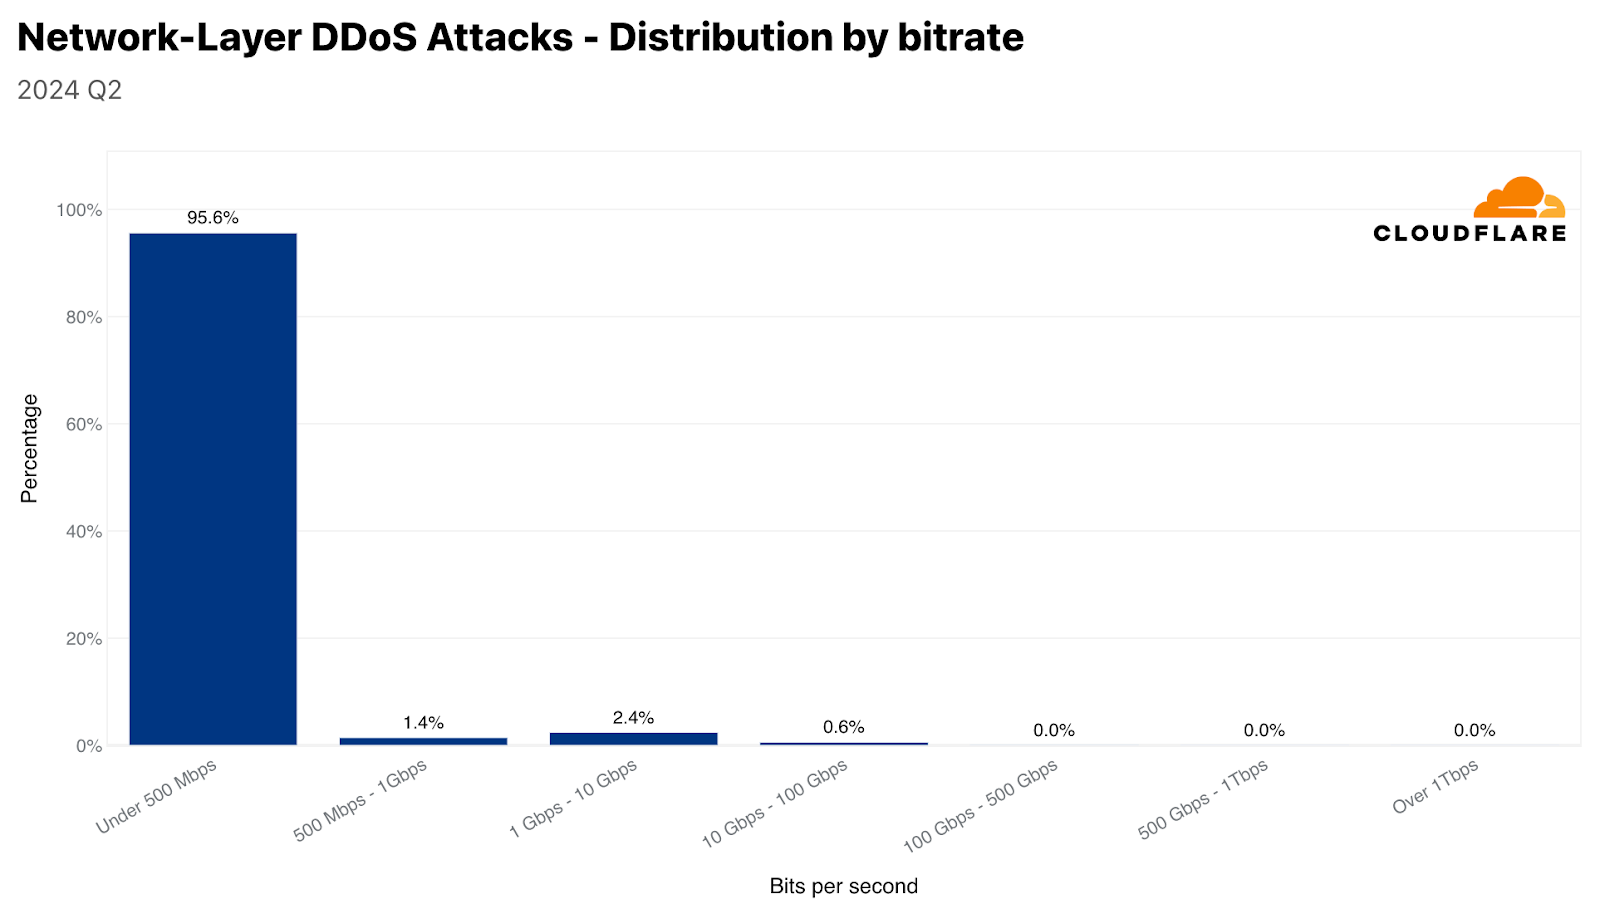 Distribution of network-layer DDoS attacks by bit rate